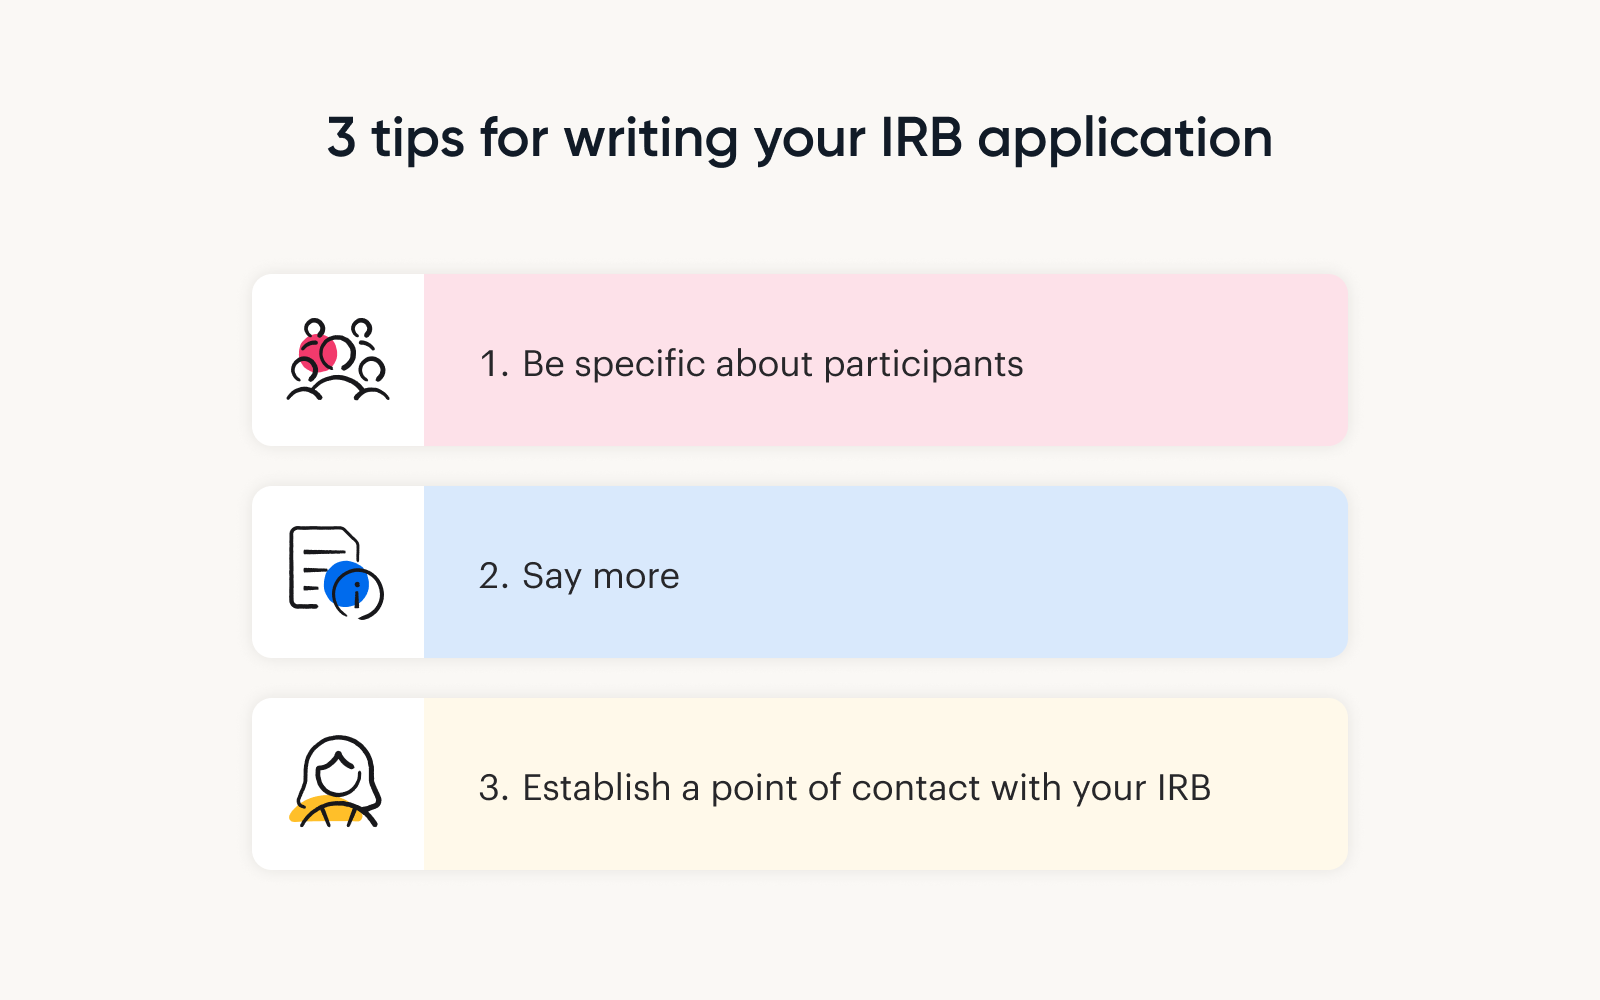 A graphic displaying 3 tips for writing an IRB application: 1. Be specific about participants. 2. Say more. 3. Establish a point of contact with your IRB.